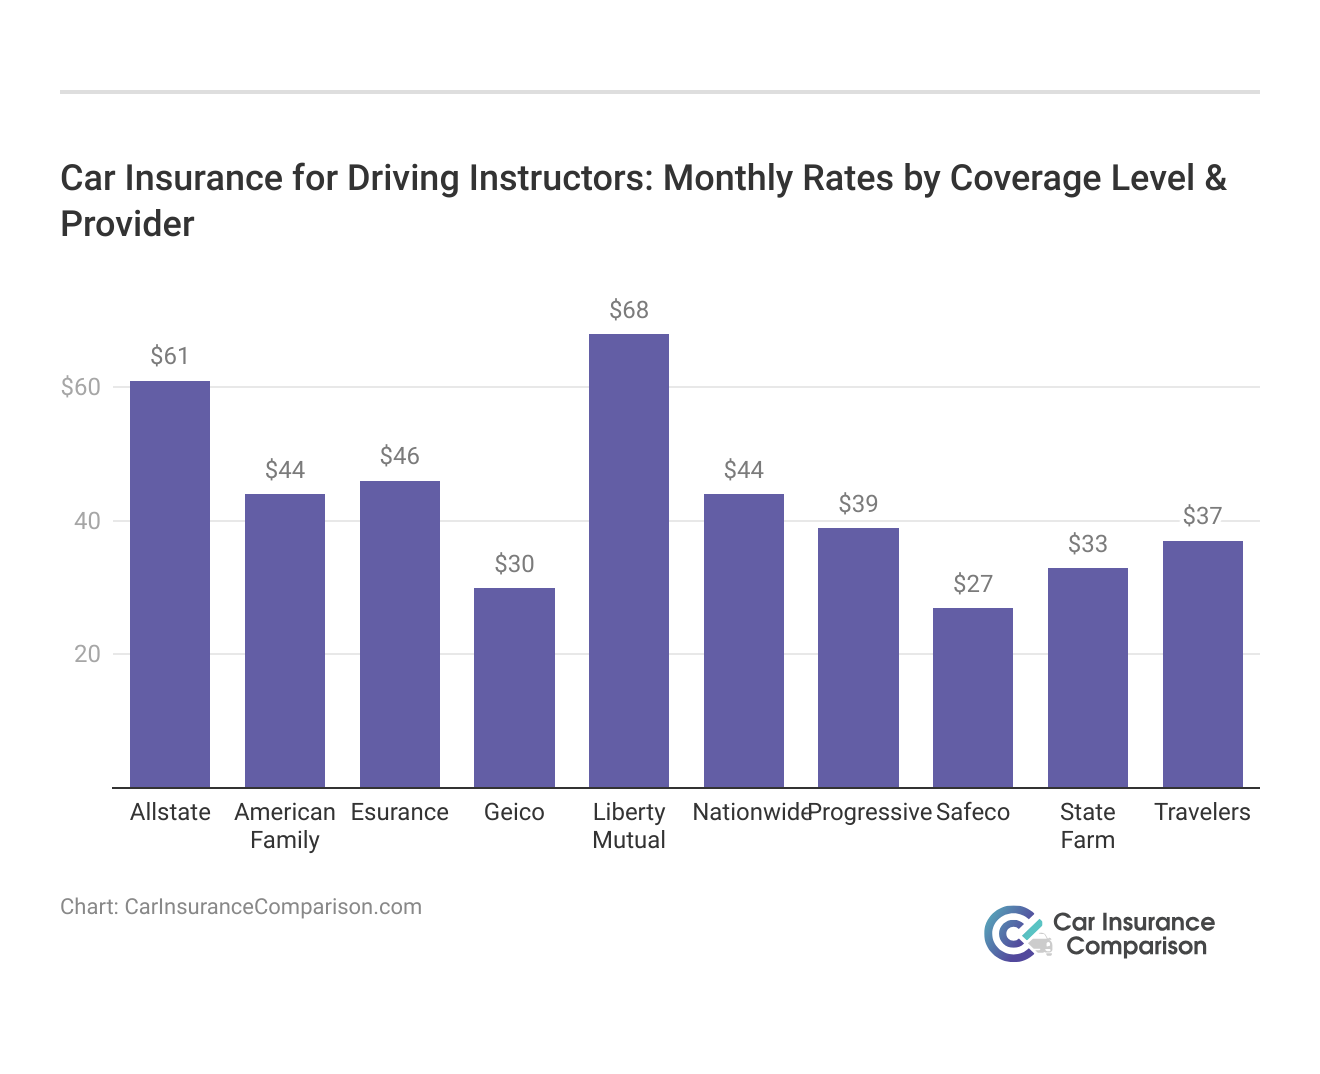 <h3>Car Insurance for Driving Instructors: Monthly Rates by Coverage Level & Provider</h3>